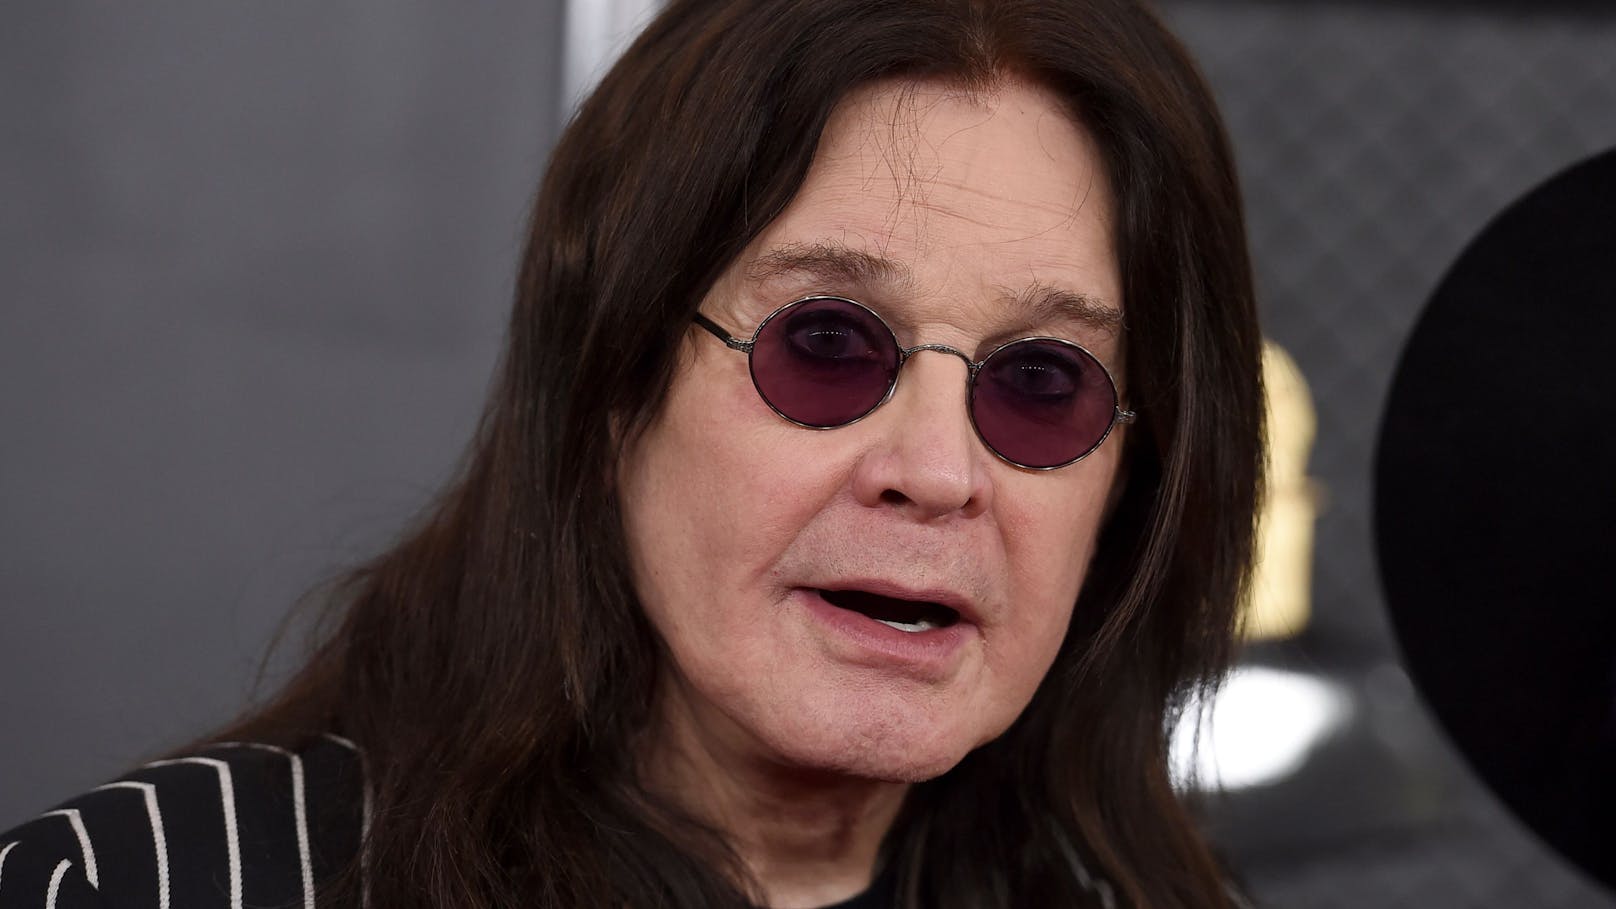 Ozzy Osbourne, Cher und Mary J. Blige in "Hall of Fame"